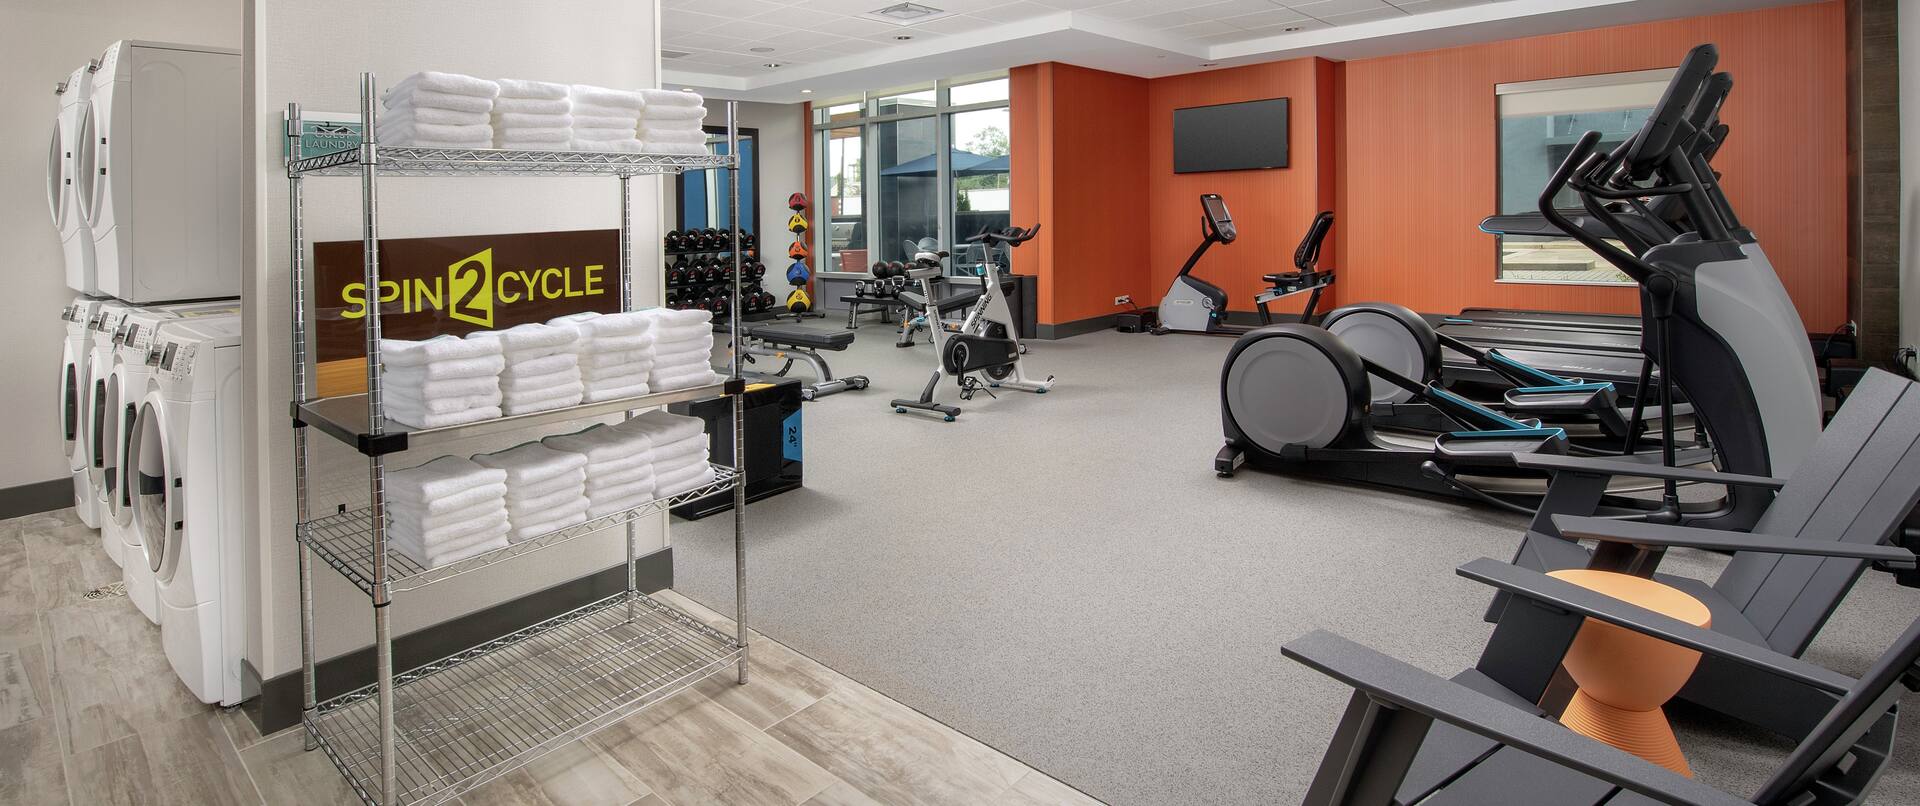 Our innovative Laundry and Fitness Facility